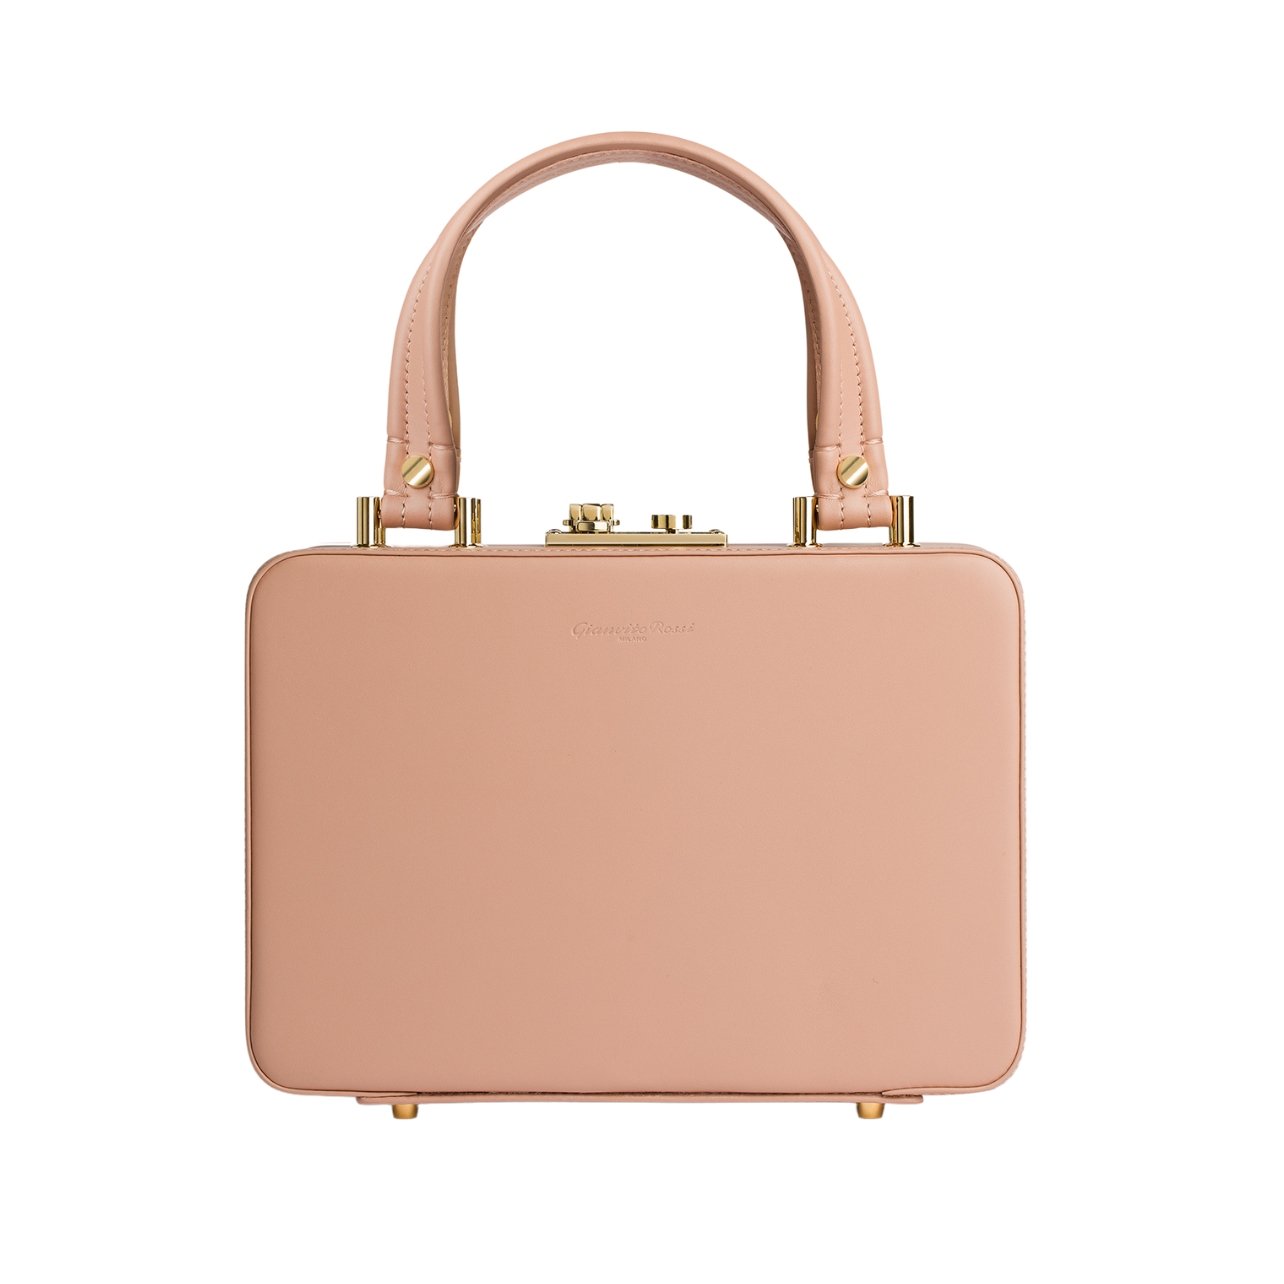 Gianvito Rossi’s leather box top-handle Valì bag in nude